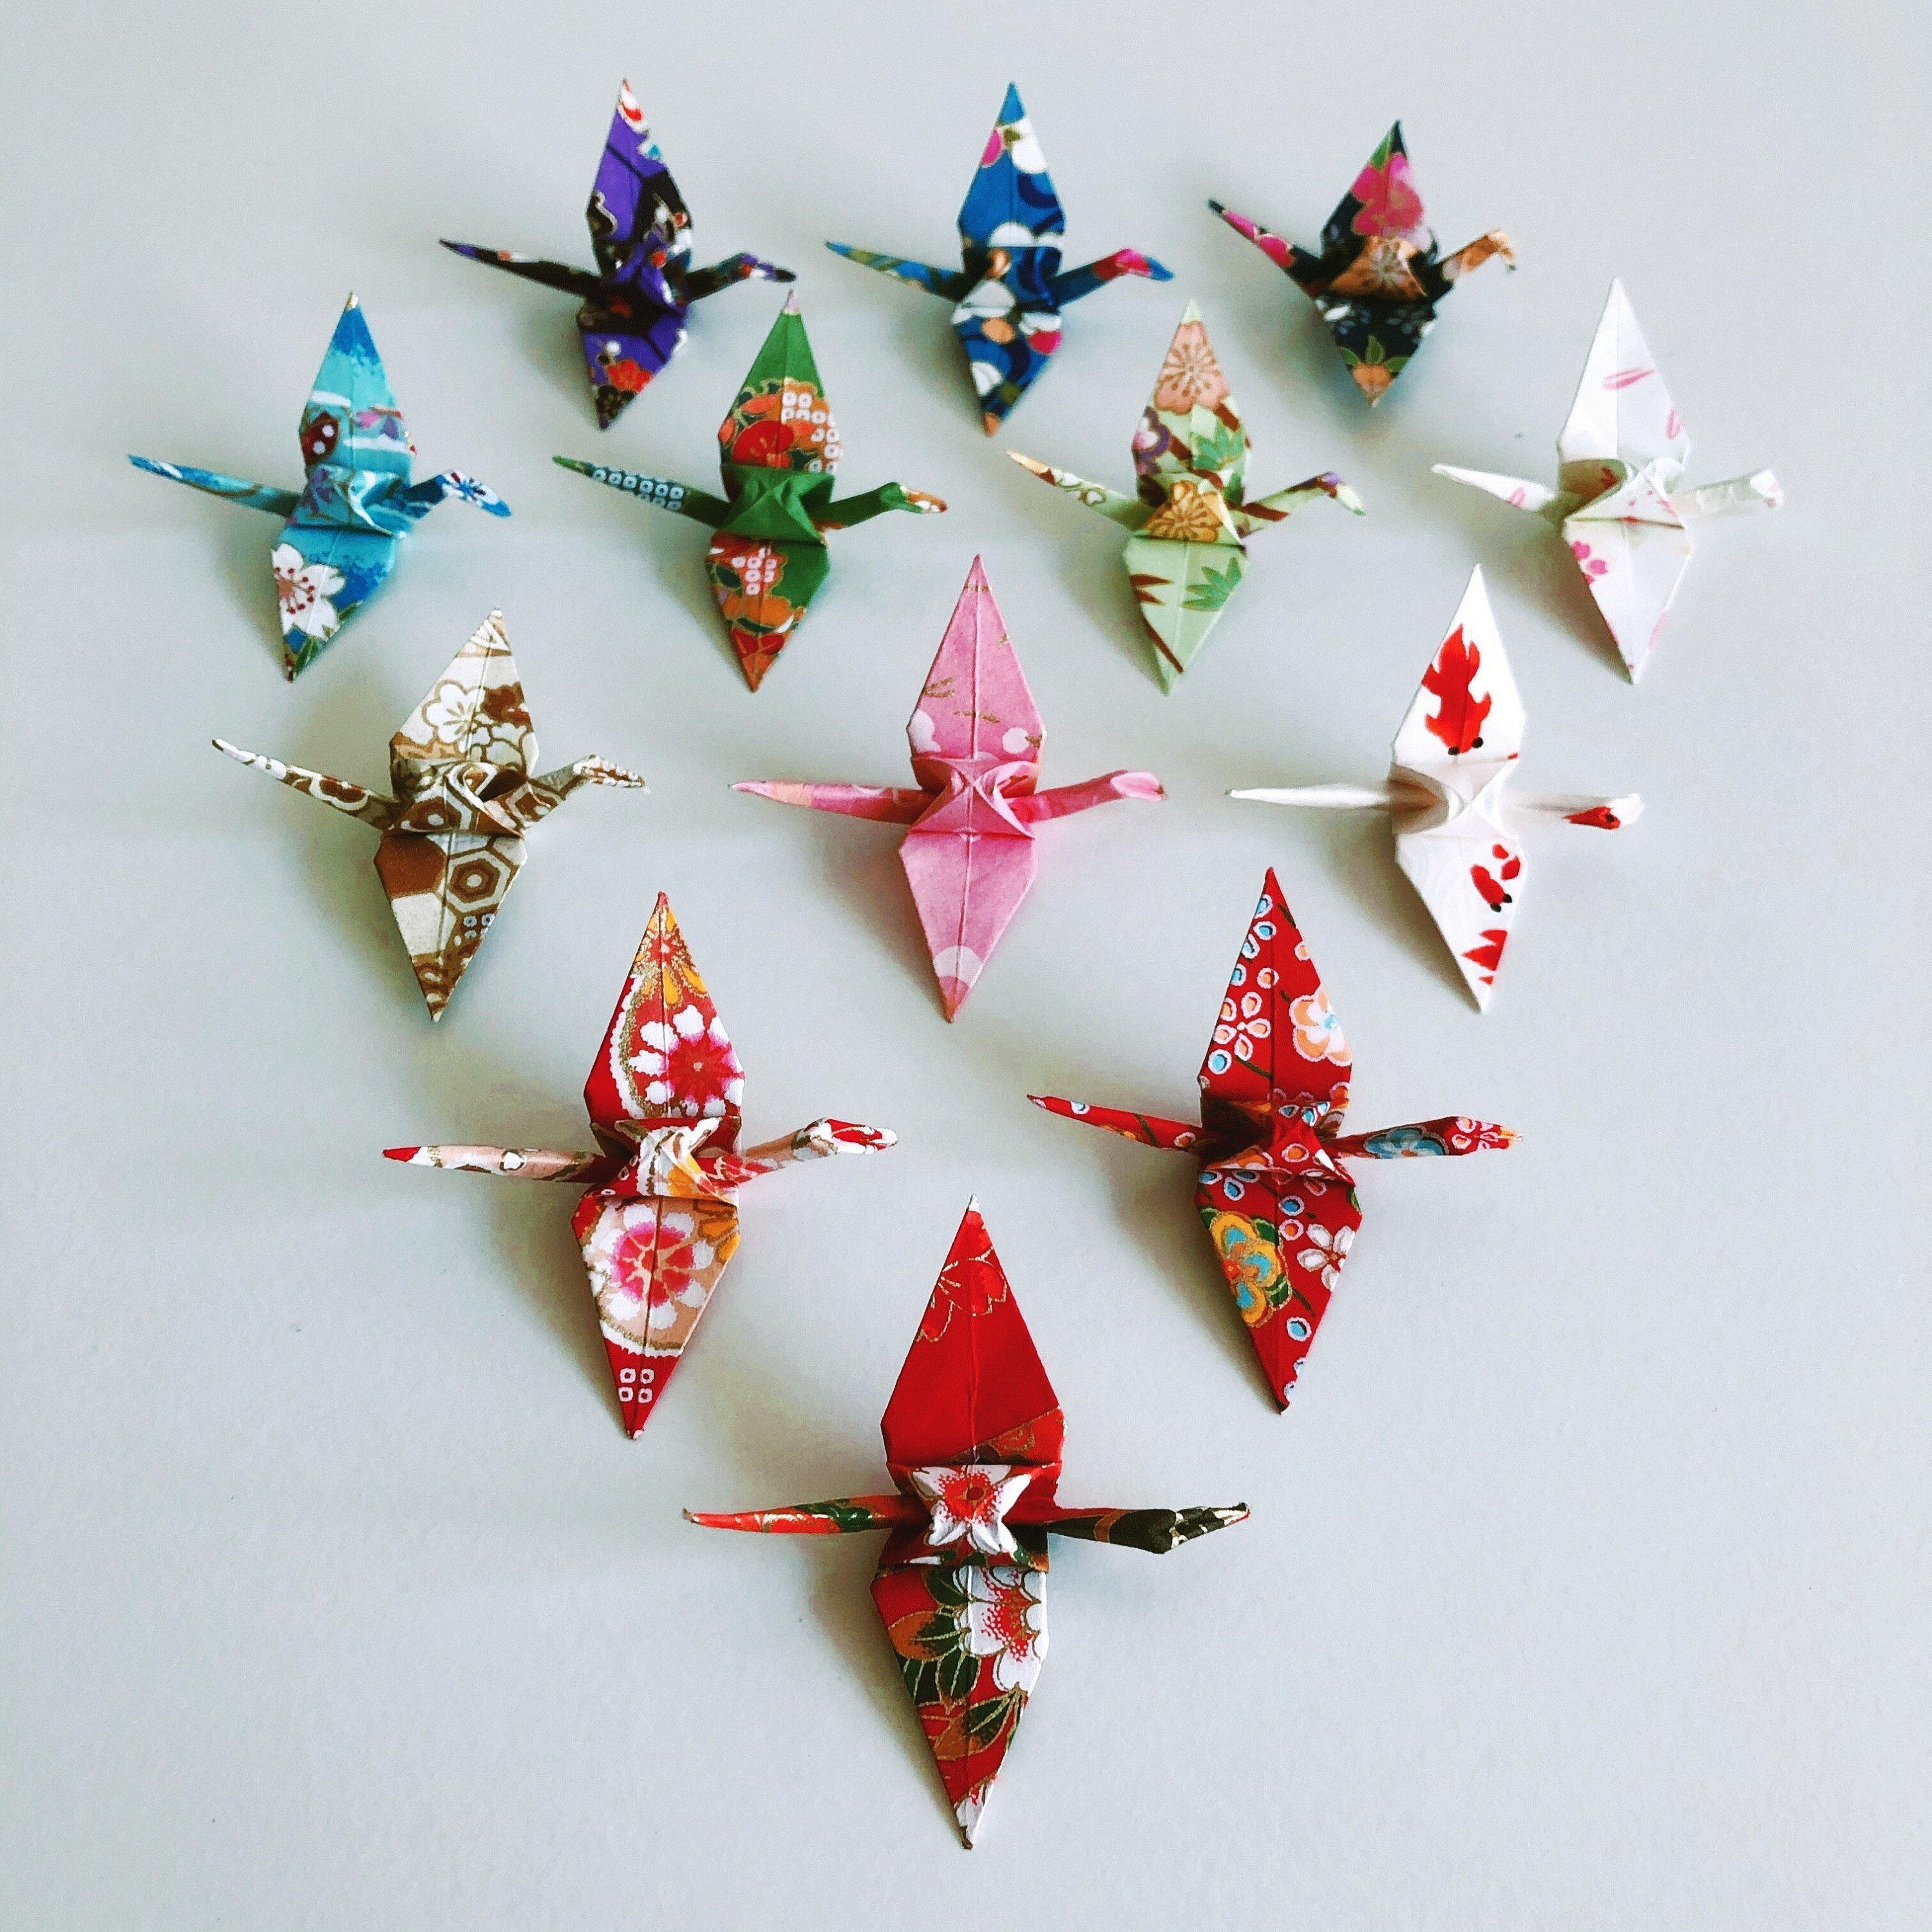 Free Shipping* 10 large origami cranes in Japanese pattern origami paper